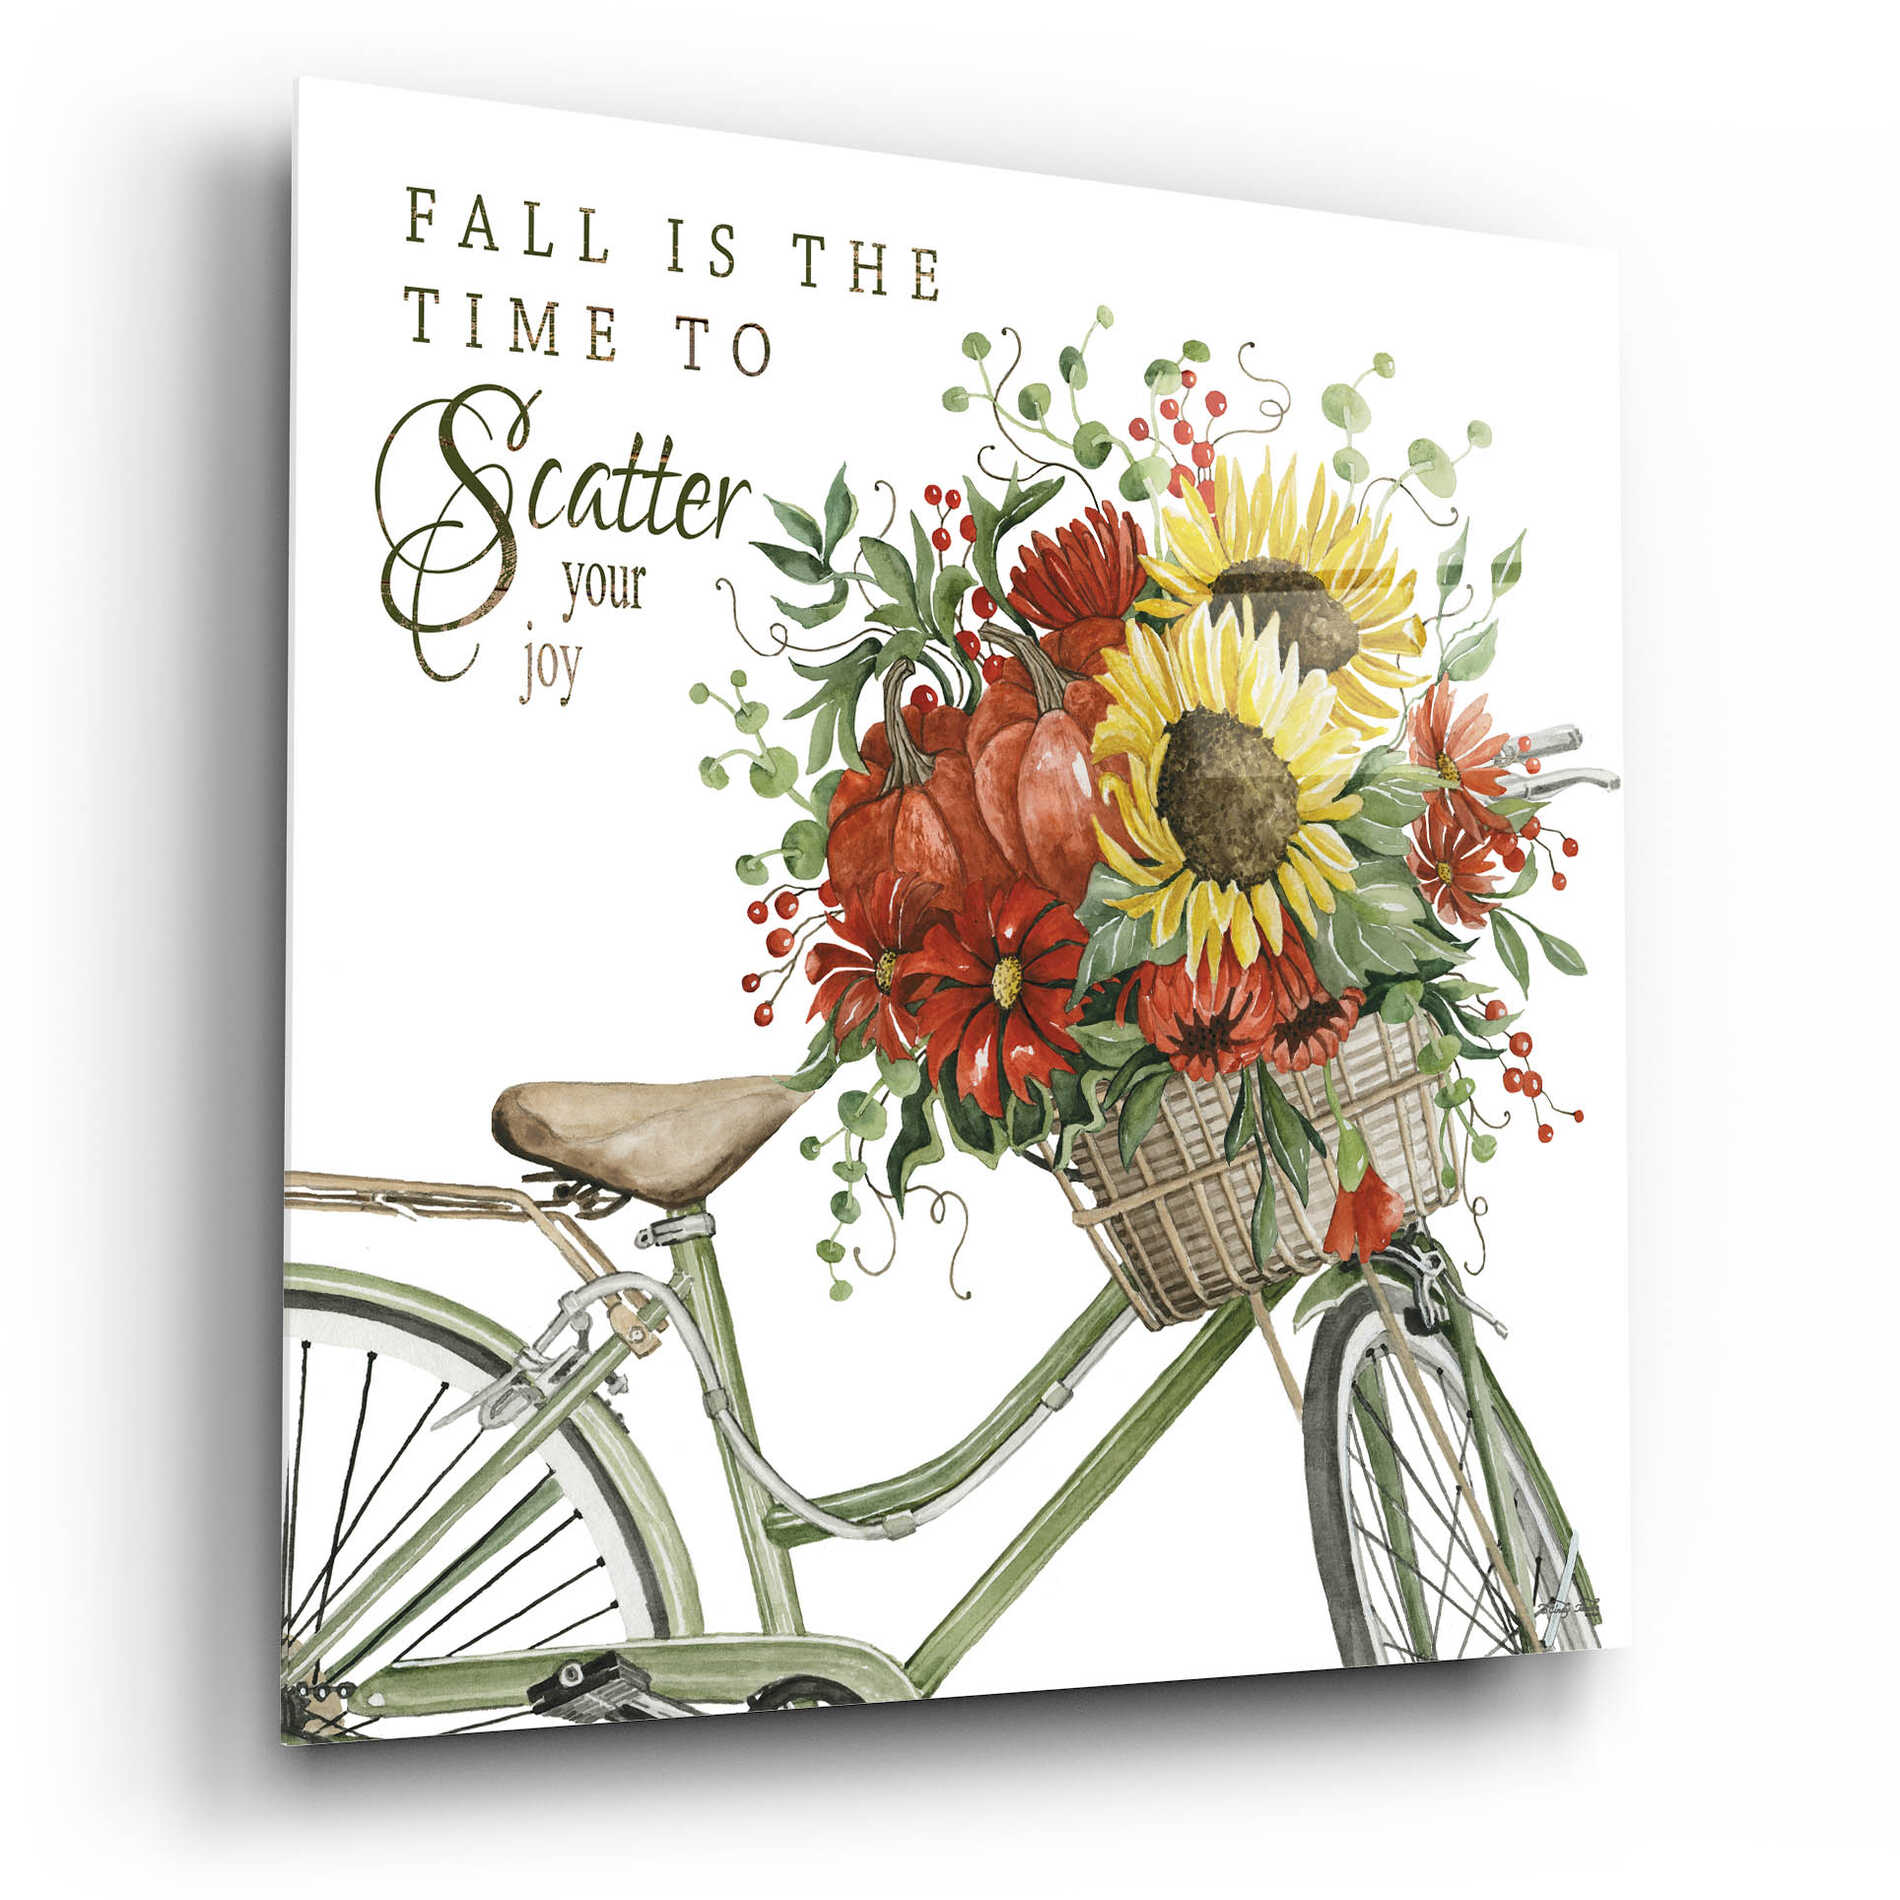 Epic Art 'Fall Is The Time To Scatter Your Joy' by Cindy Jacobs, Acrylic Glass Wall Art,12x12